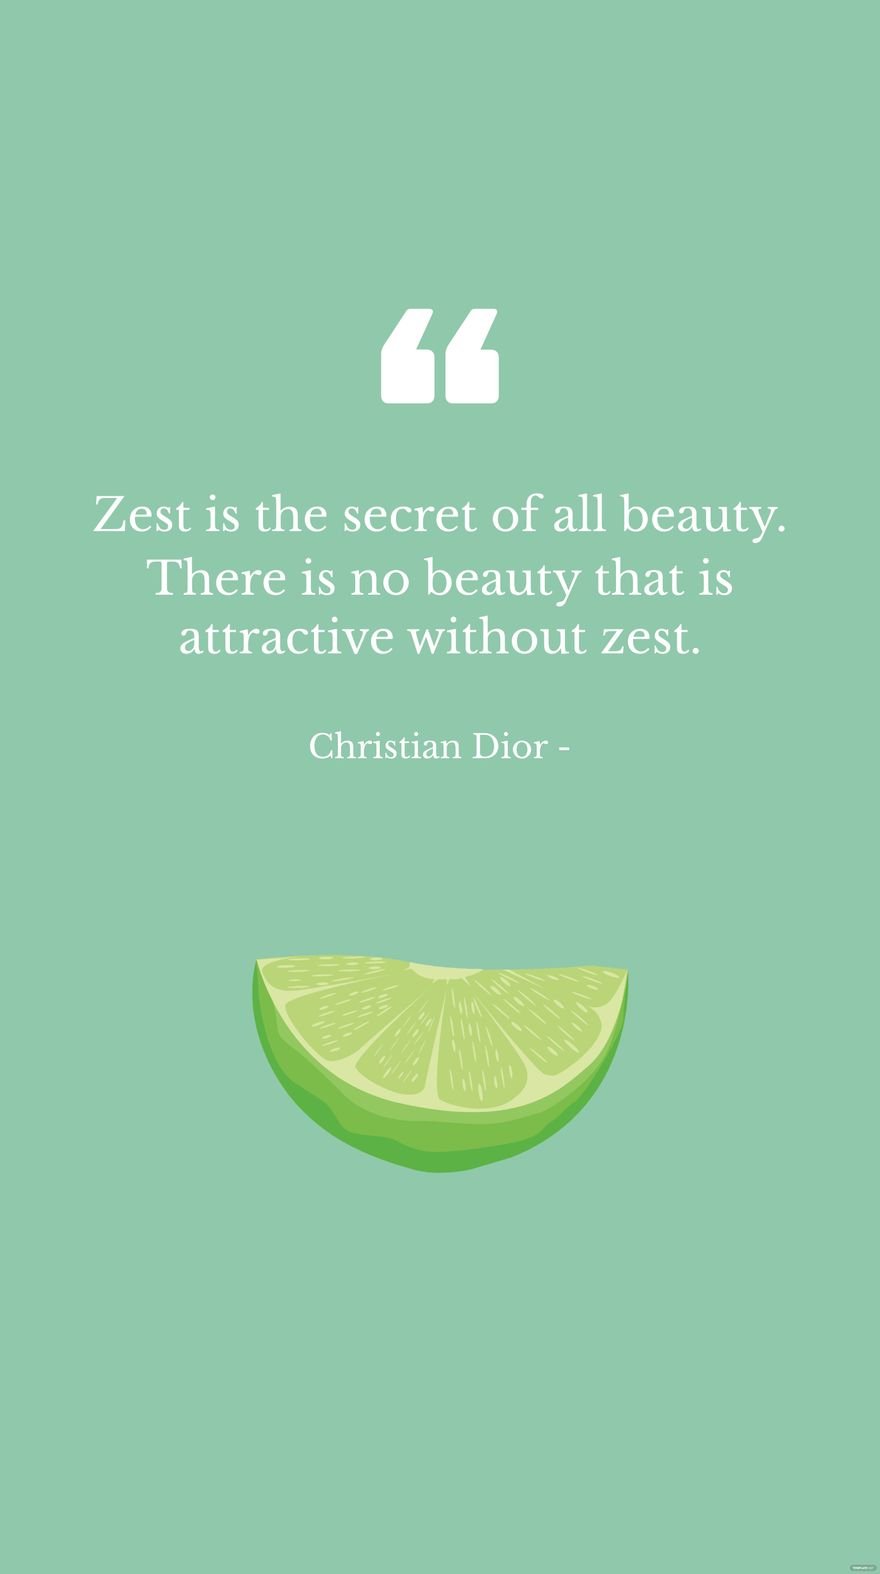 Free Christian Dior - Zest is the secret of all beauty. There is no beauty that is attractive without zest. in JPG